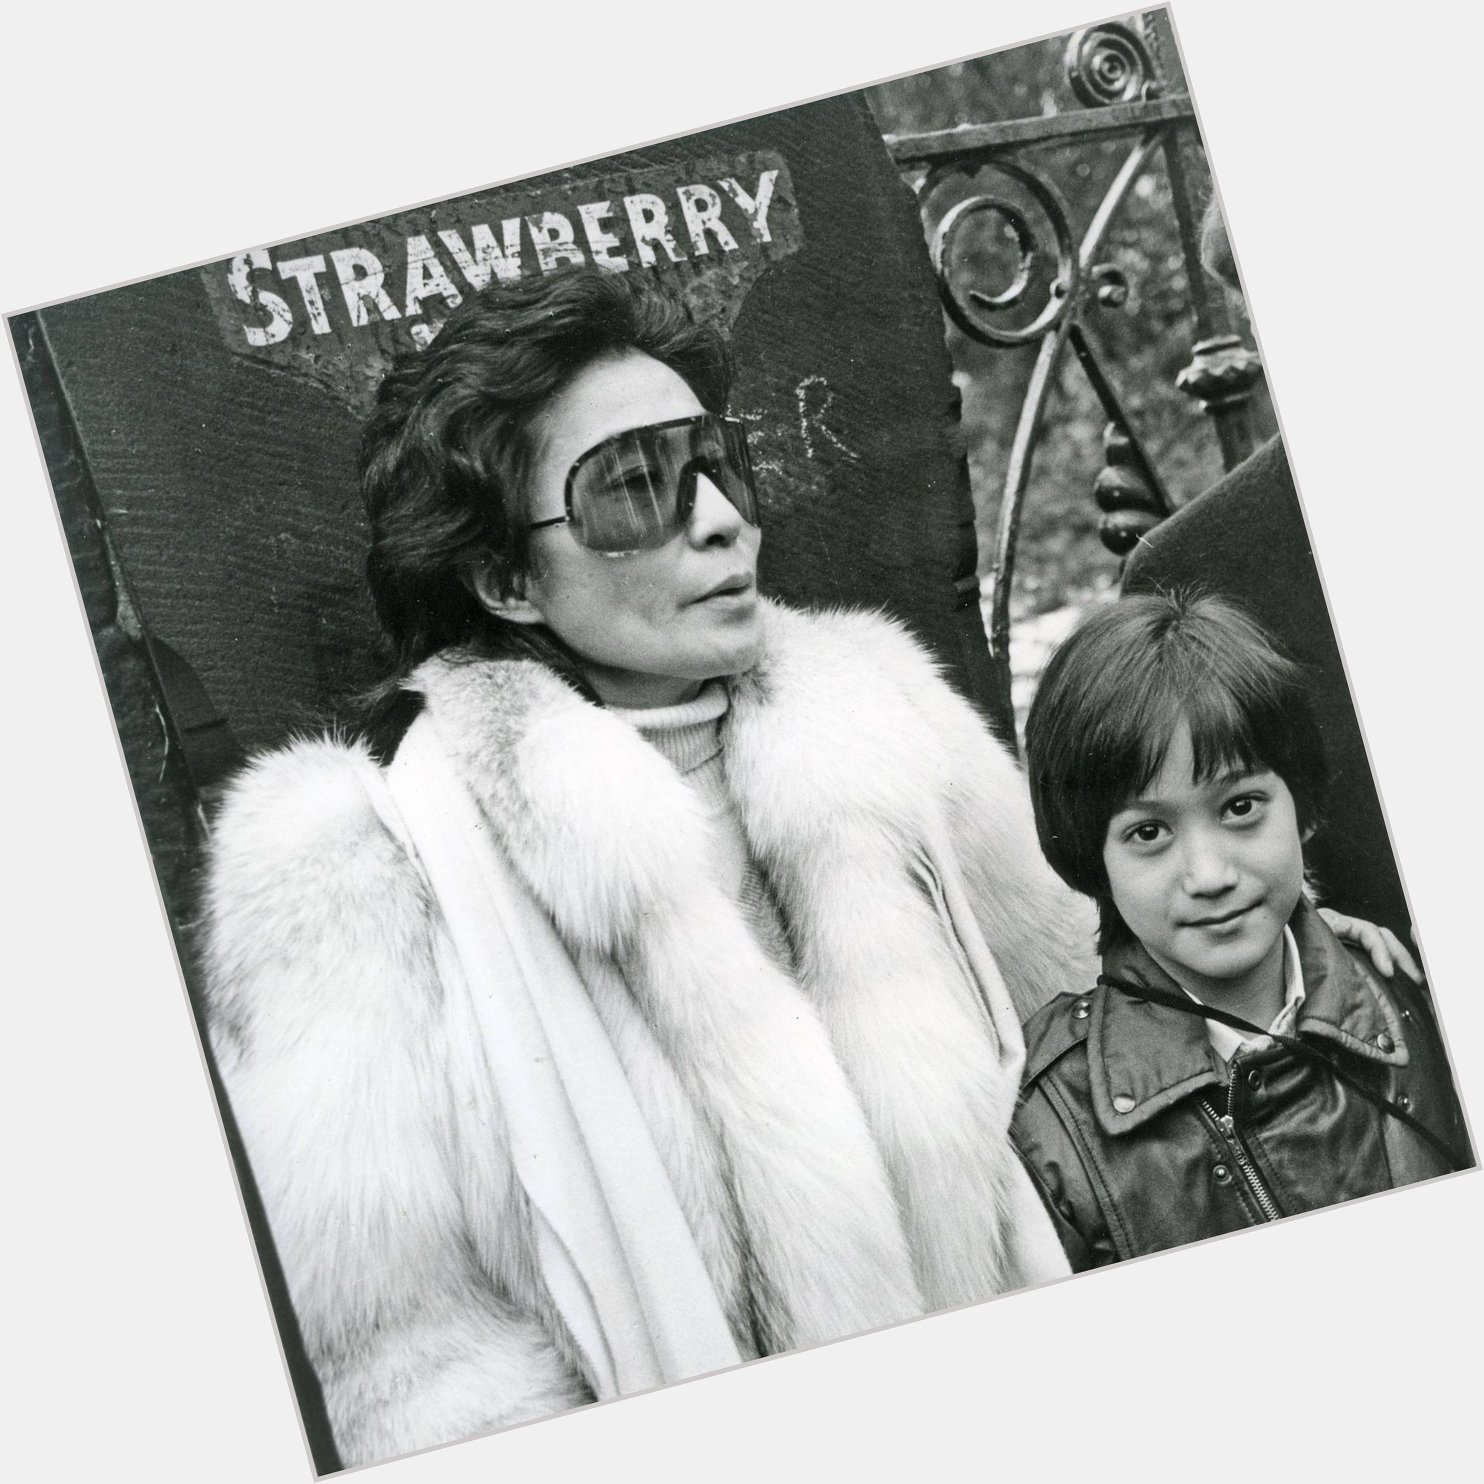 Happy 87th Birthday to Yoko Ono! Visiting Strawberry Field with Sean in 1984. 